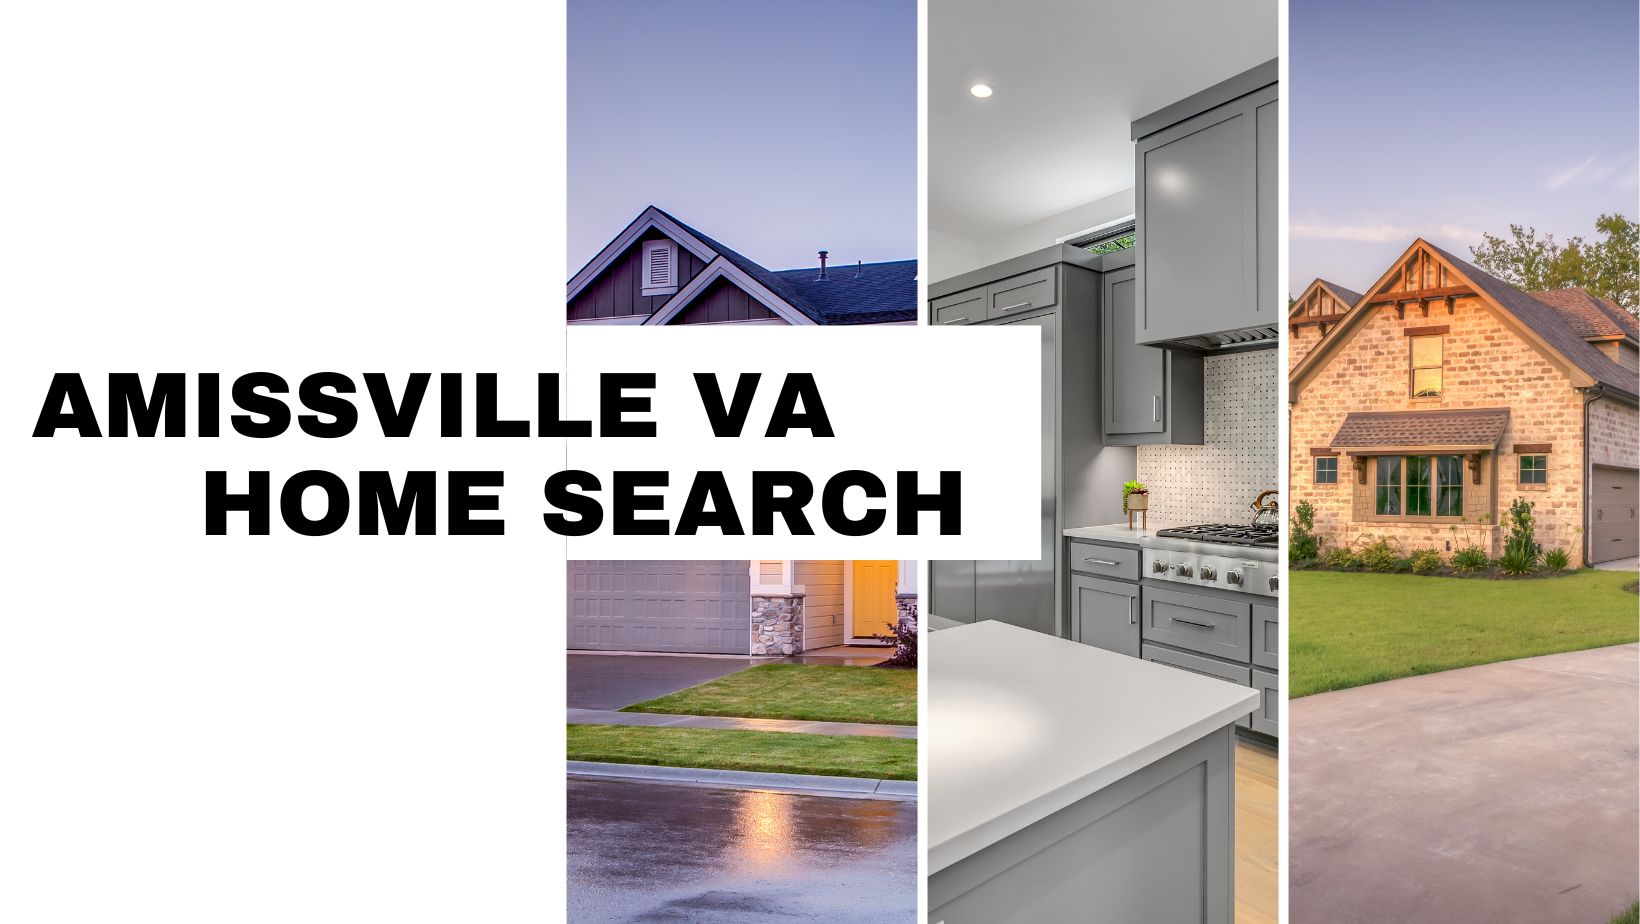 Amissville VA Homes for Sale in Culpeper County Virginia